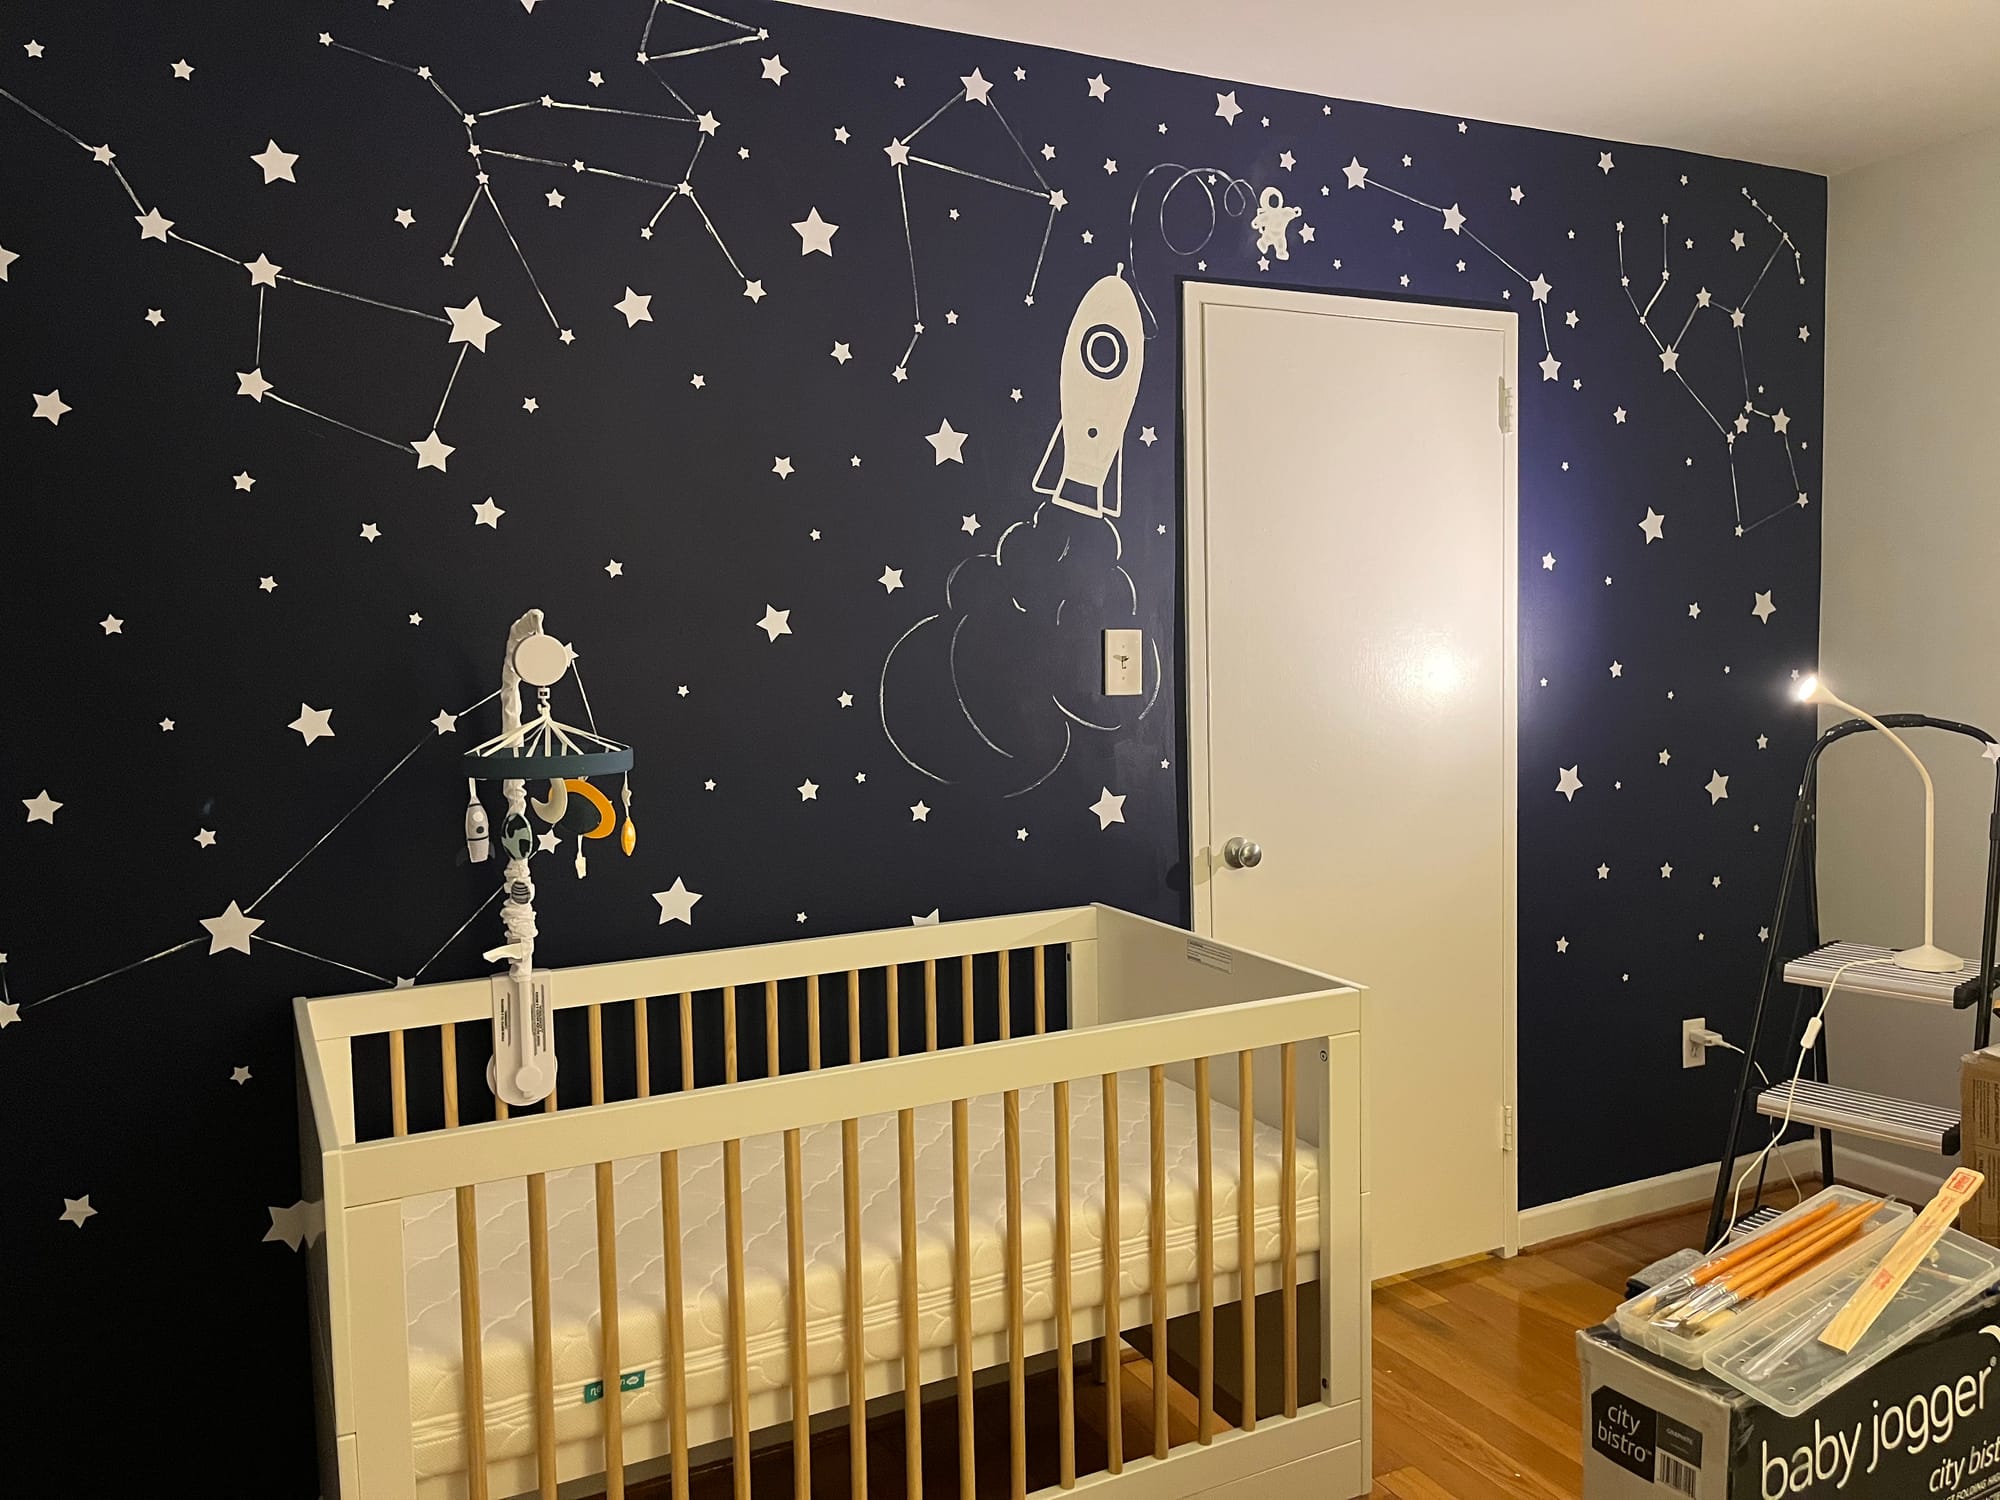 Space themed mural in the nursery. Dark blue background with hand painted constellations, a rocket ship, and astronaut in a spacesuit.